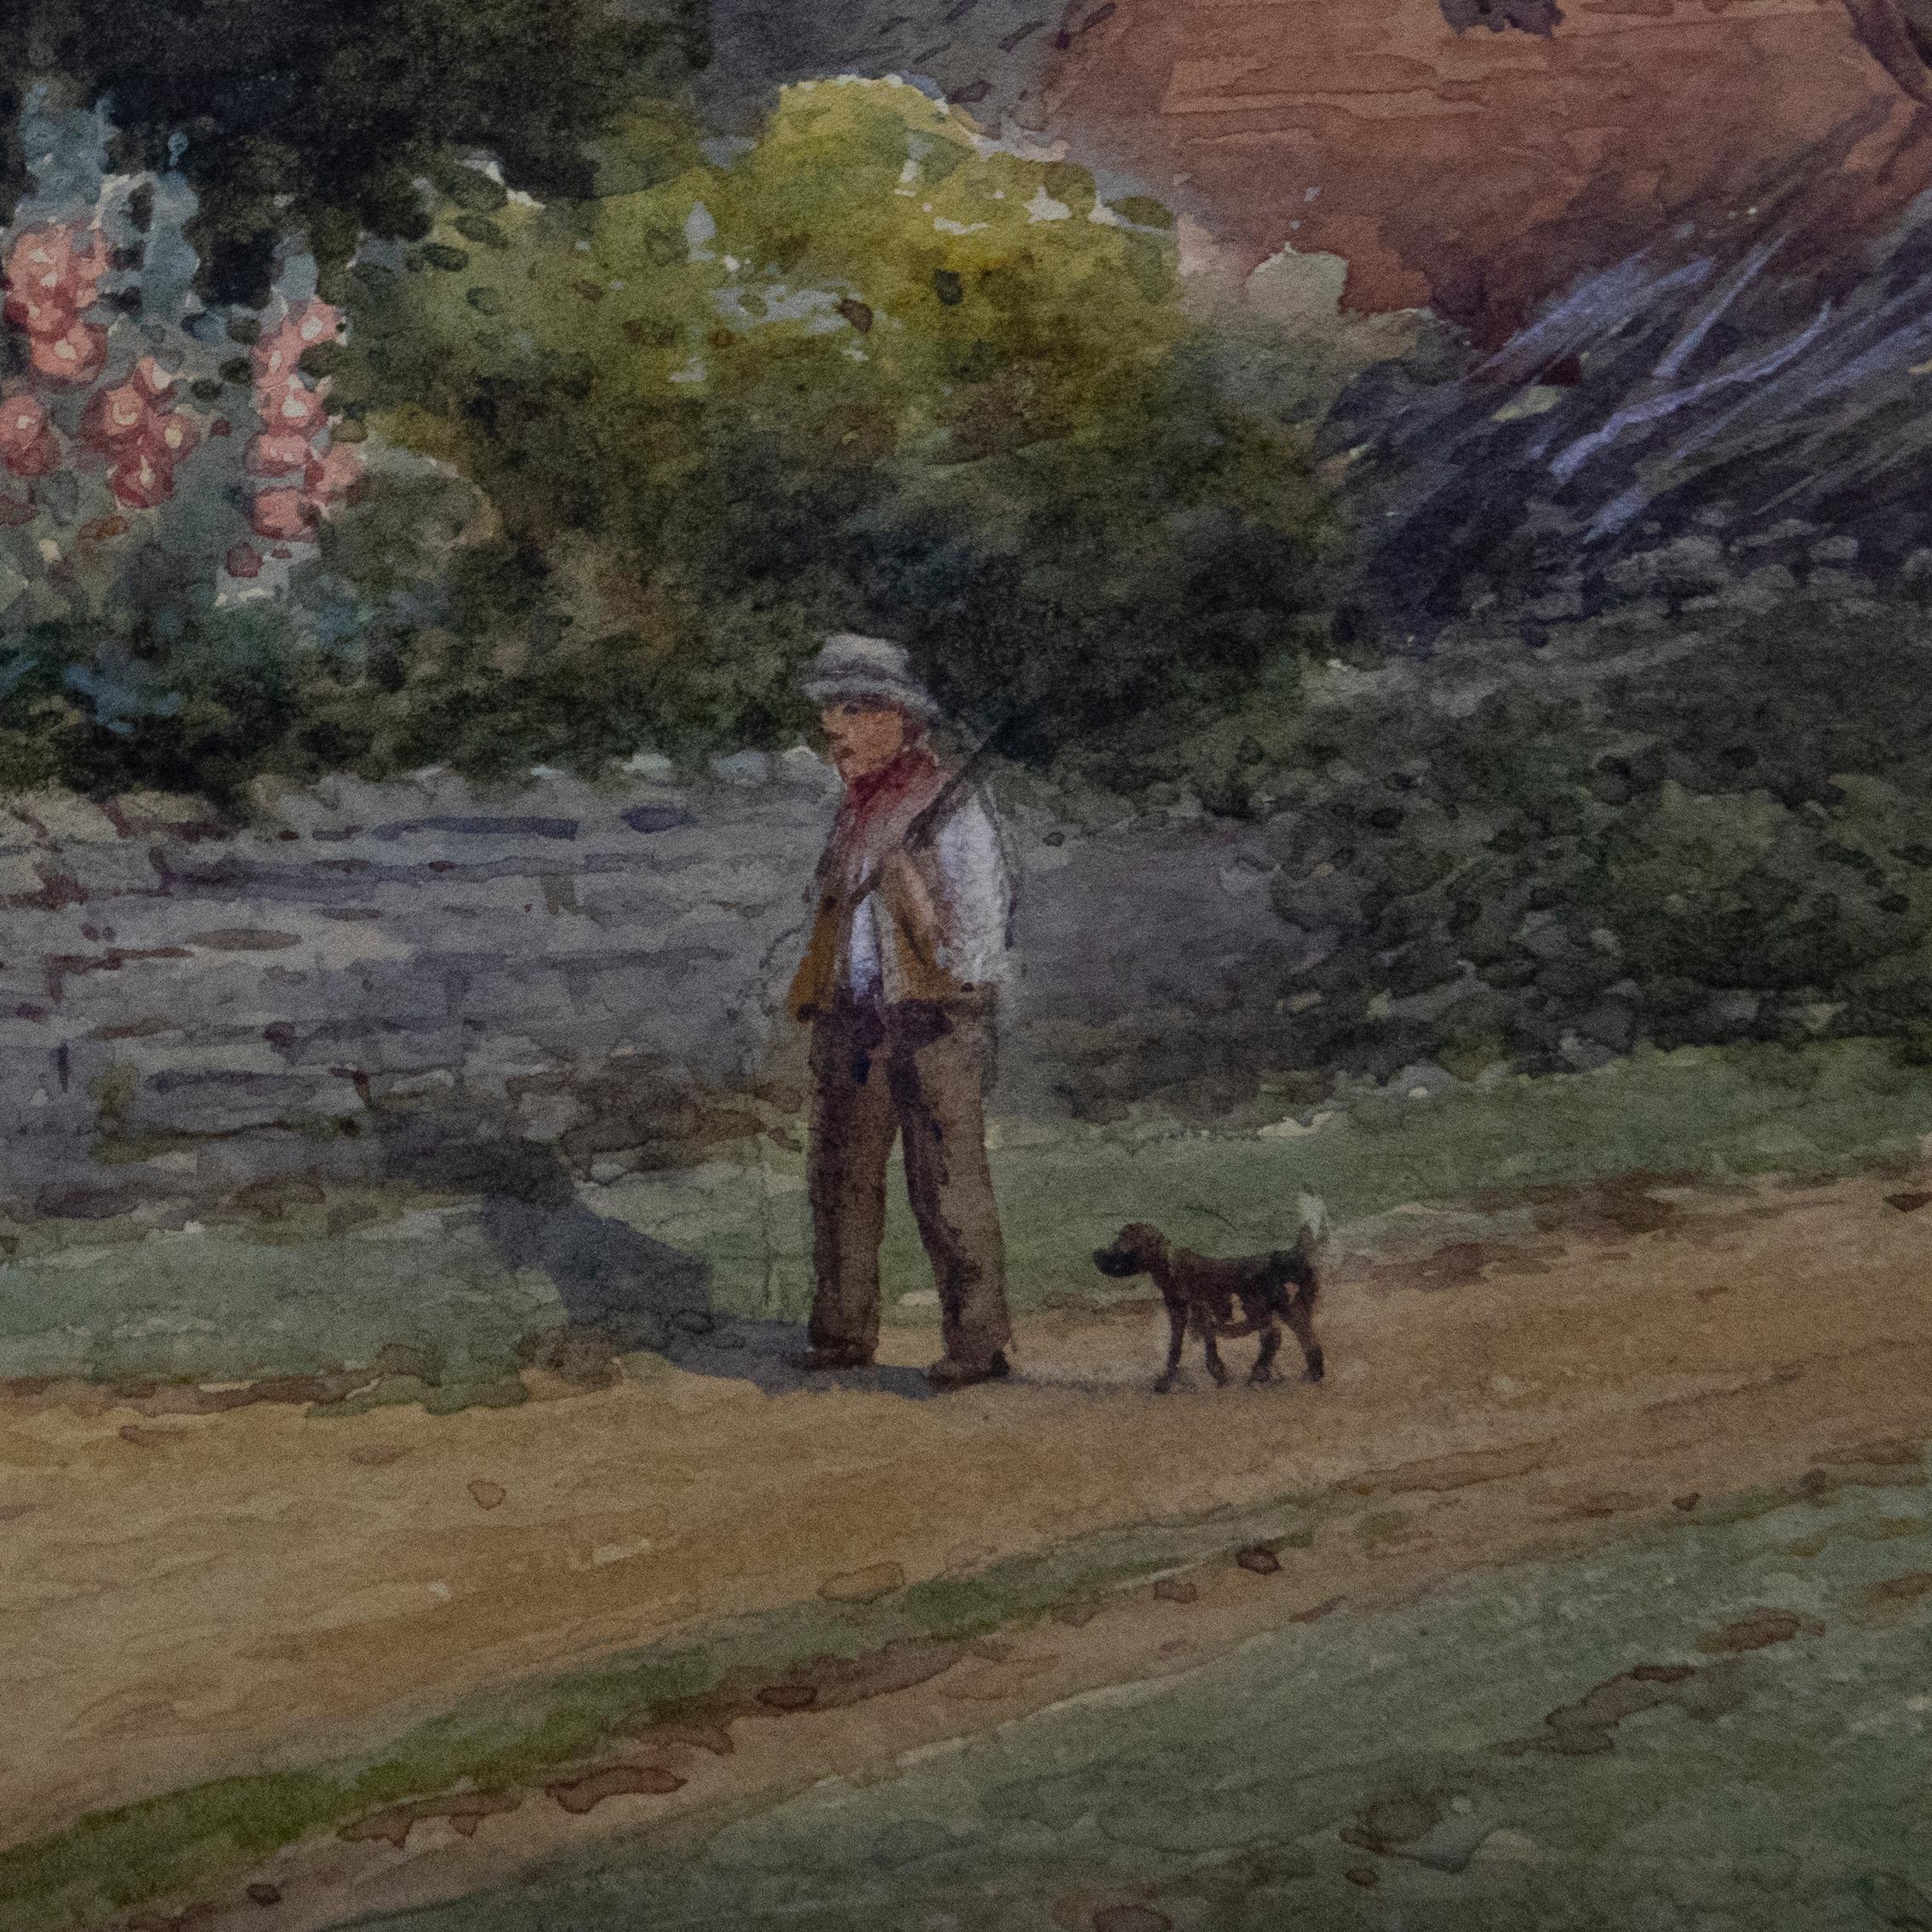 This delightful watercolour captures a farming family greeting each other at the farmhouse gate. A young girl can be seen eagerly awaiting the return of her father after a long day in the field. Stooks of hay can be seen to the distance, adjacent to